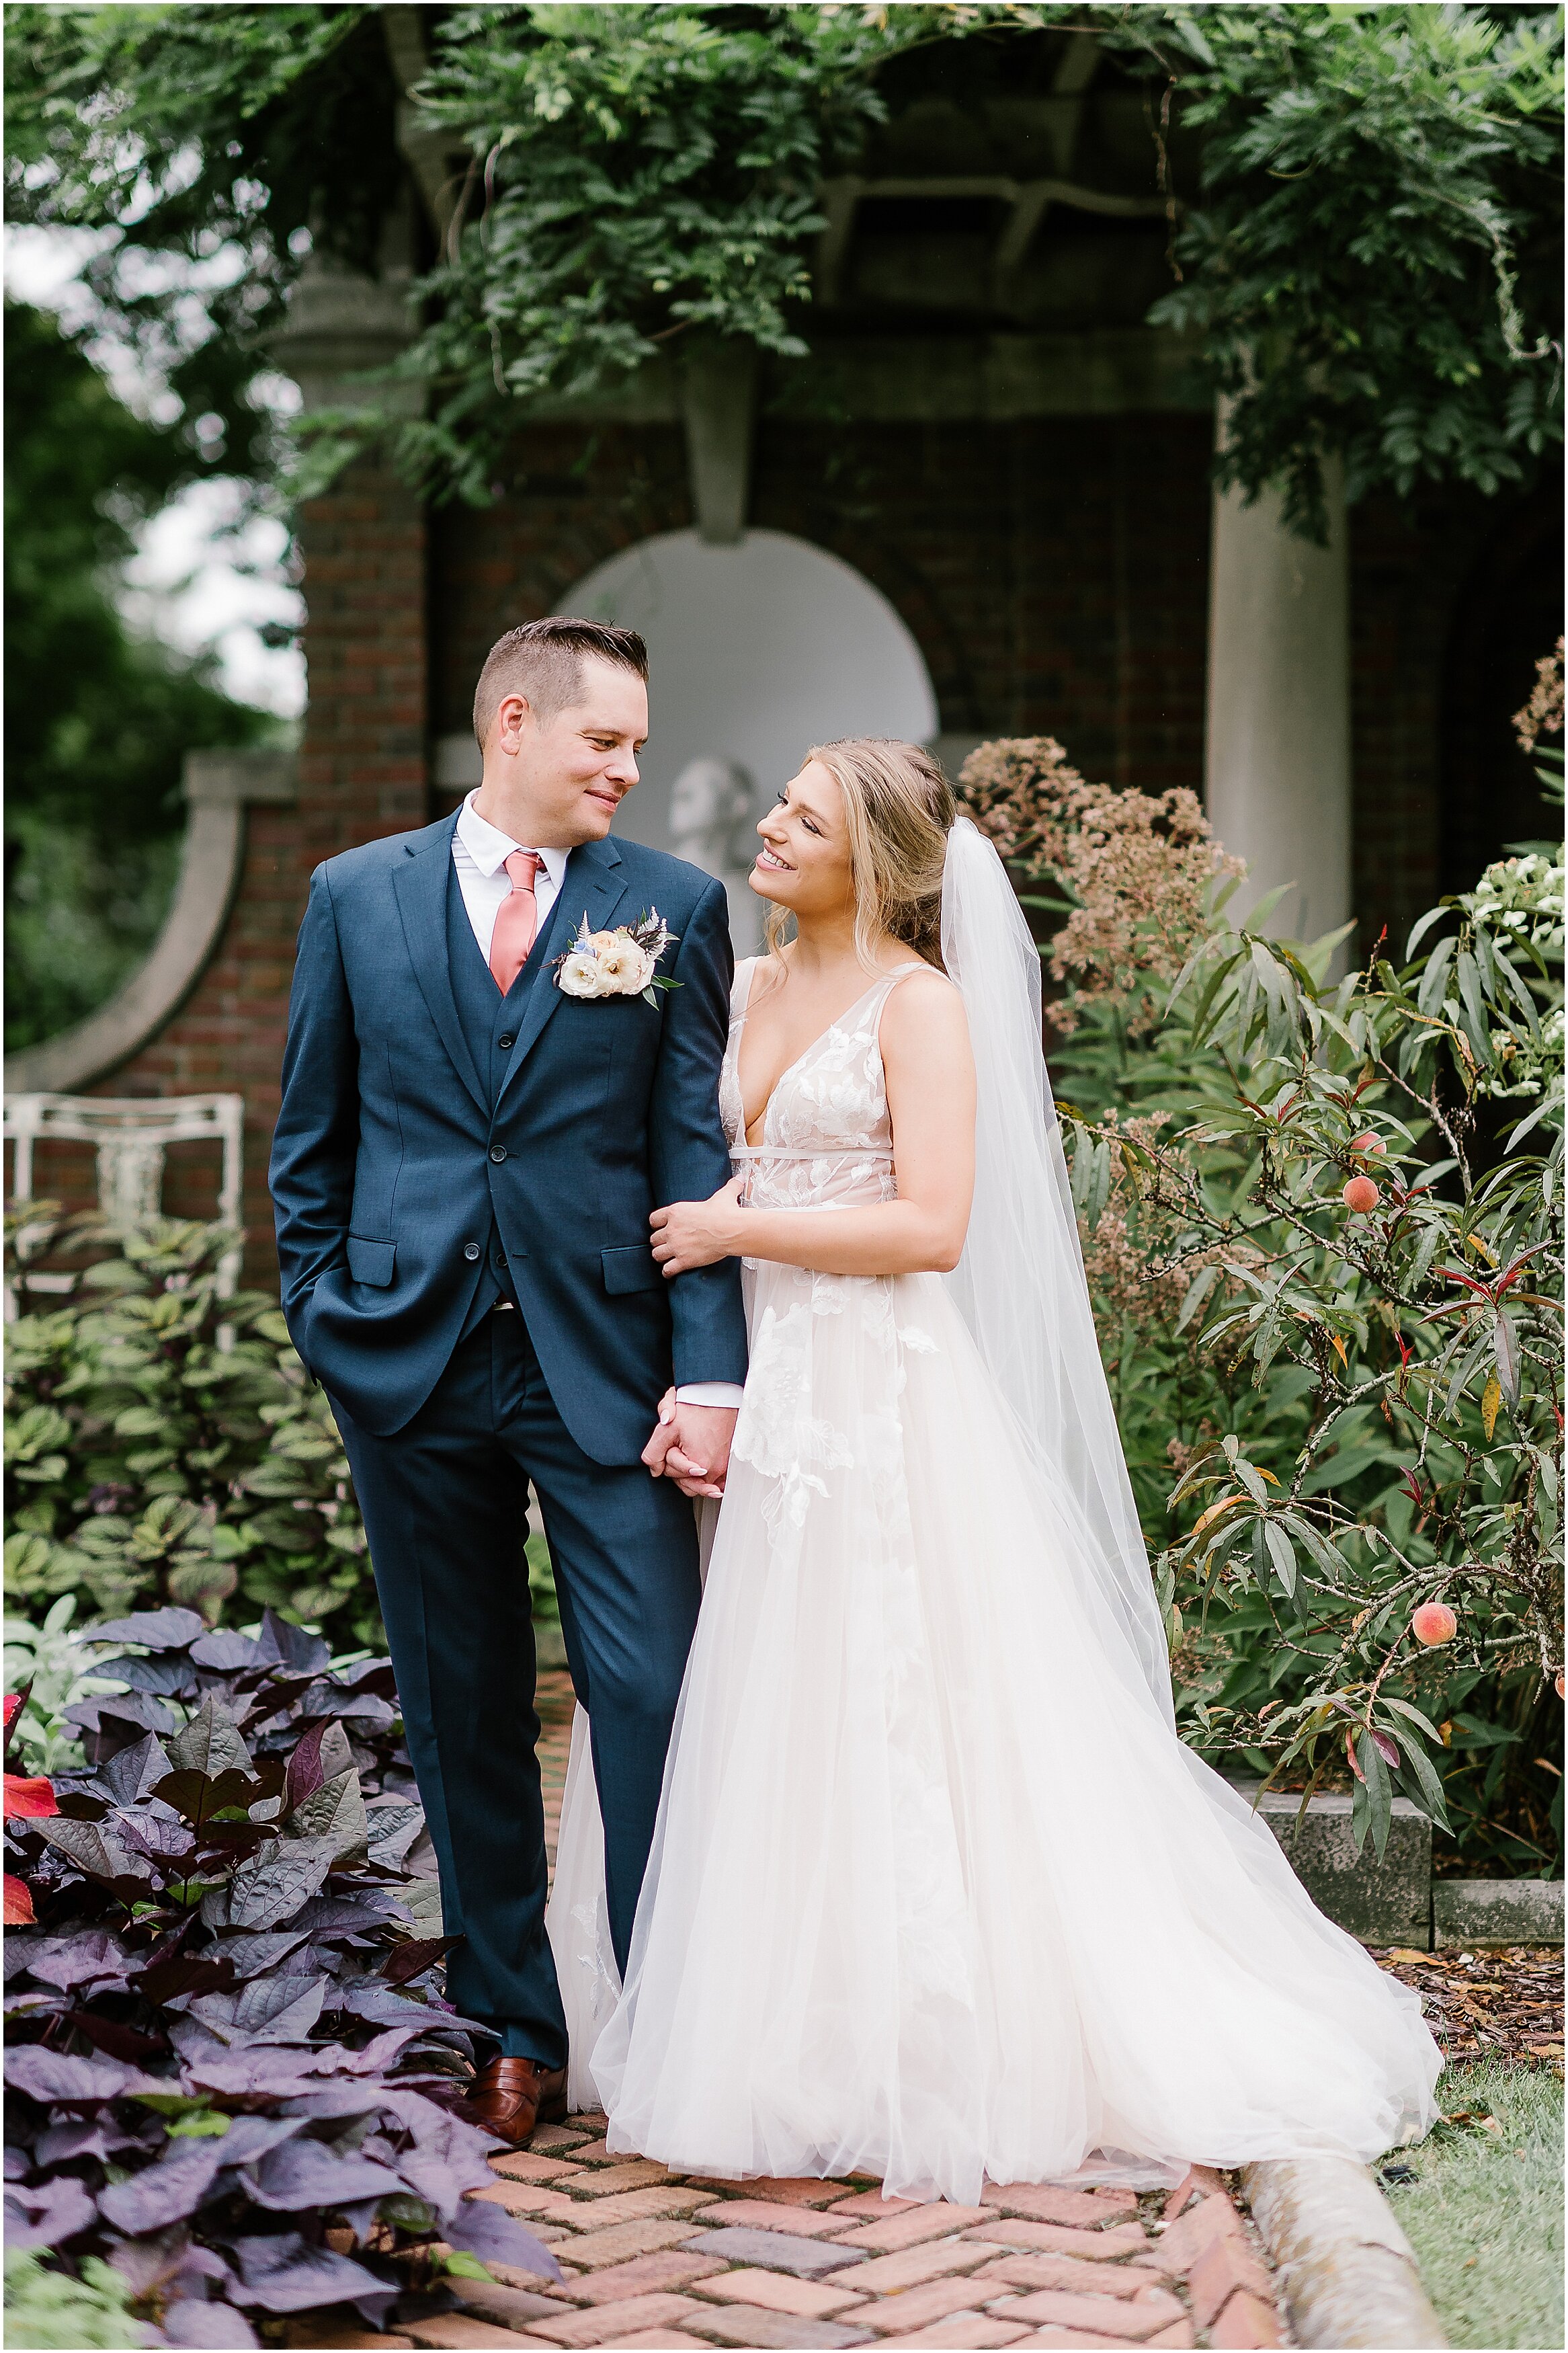 Rebecca Shehorn Photography Colleen and Kyle Inn at Irwin Gardens Wedding-340_The Commons Columbus Inn at Irwin Garden Indianapolis Wedding Photographer.jpg